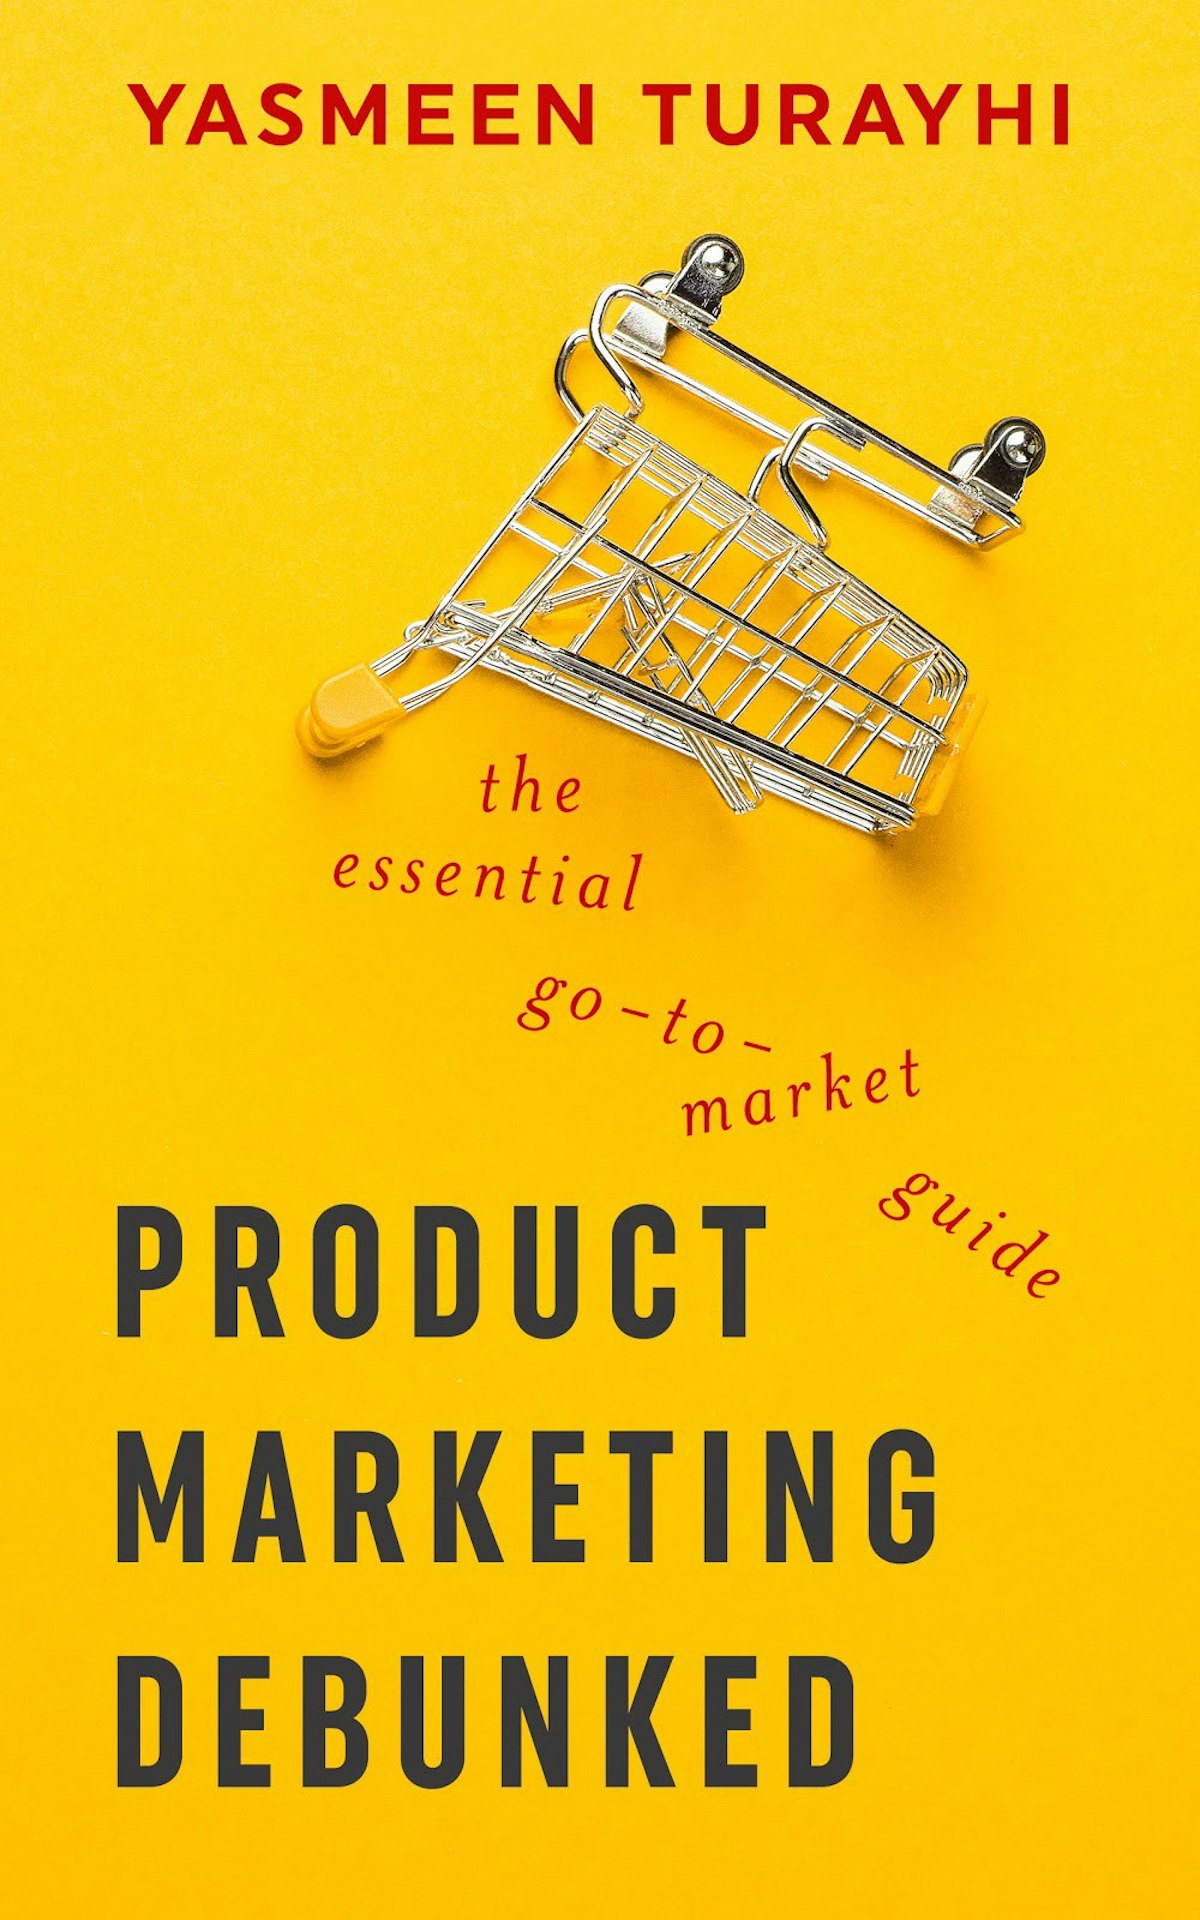 featured image - Product Marketing Debunked.